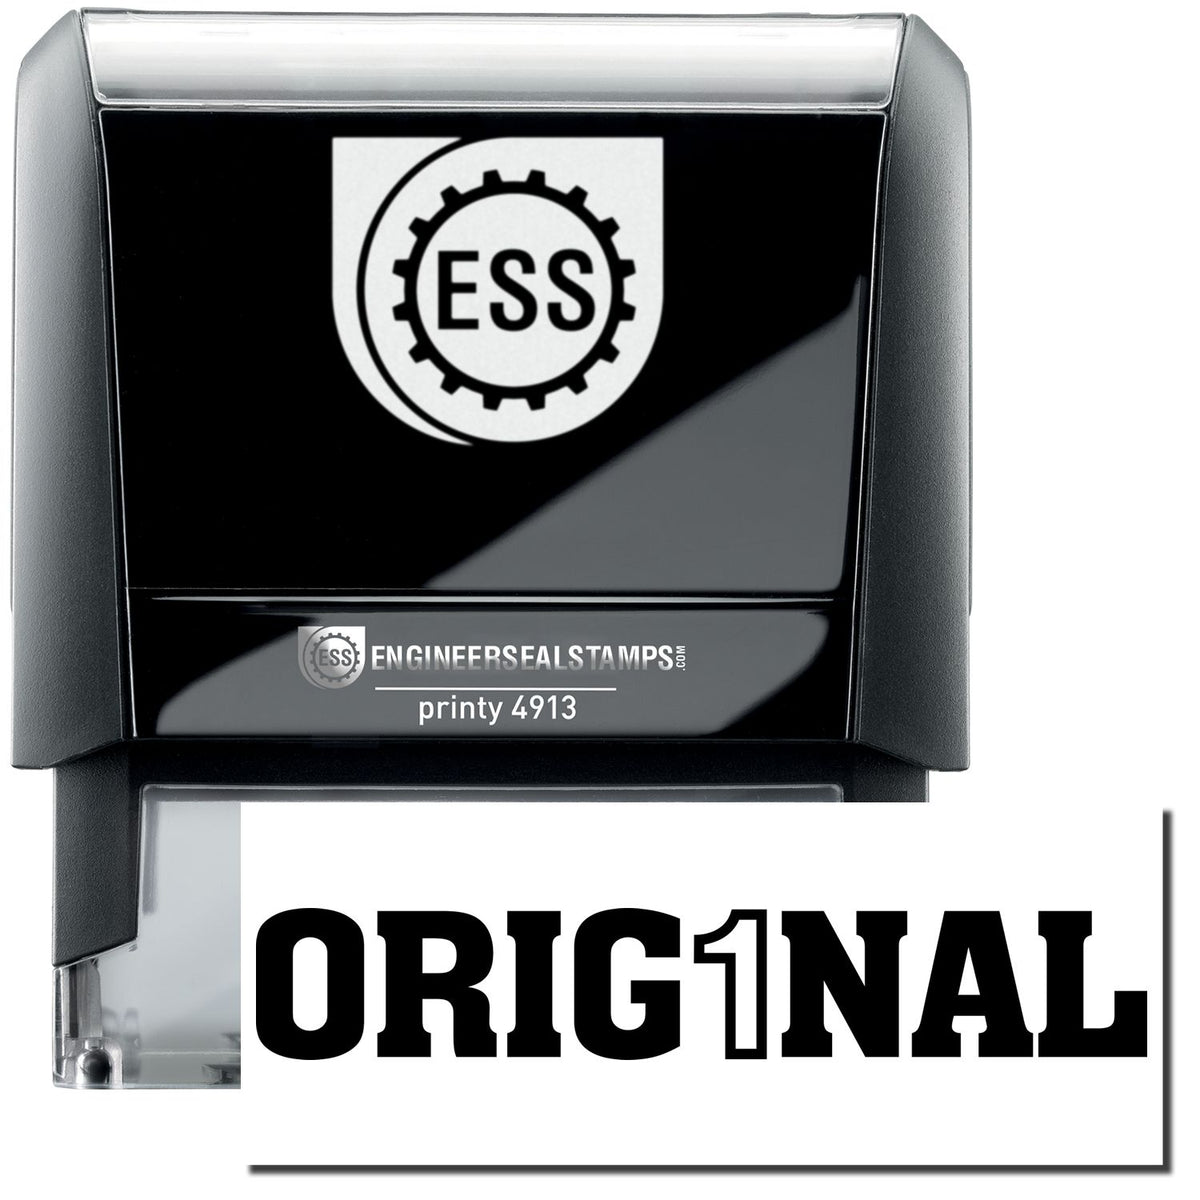 A self-inking stamp with a stamped image showing how the text &quot;ORIG1NAL&quot; in a large bold font is displayed by it after stamping.